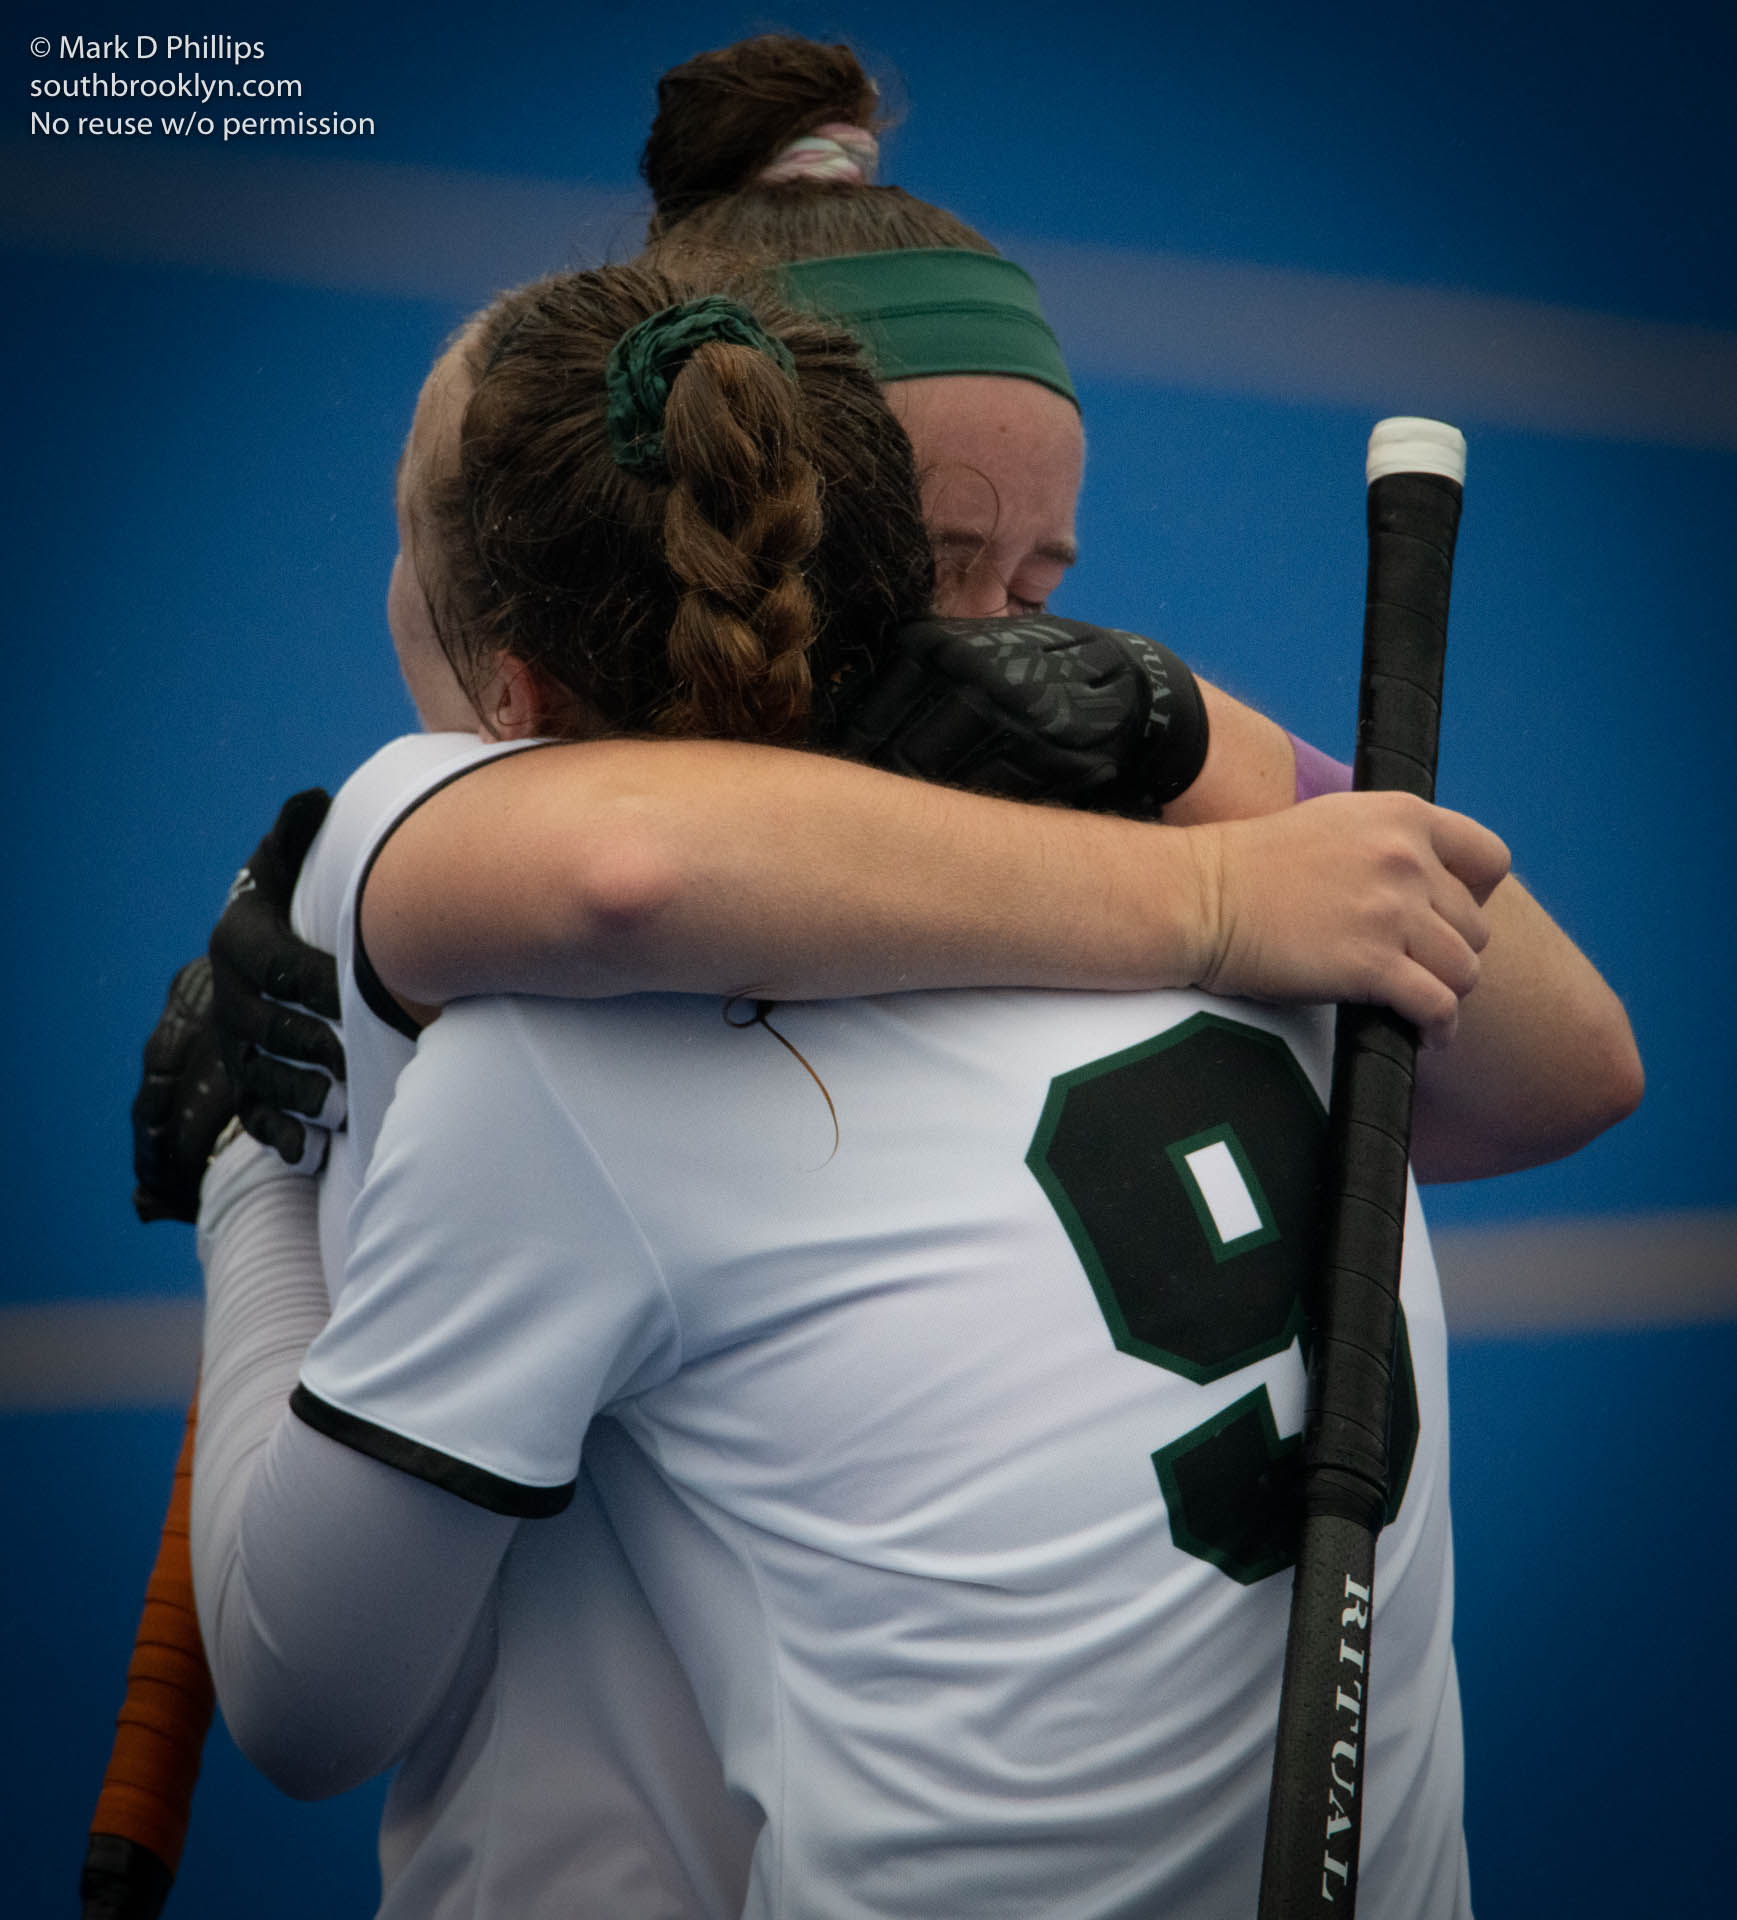 Liza Phillips and Dana Edwards hug after their final game of their final season in their Graduate year as Nichols College Field Hockey plays University of New England on October 30, 2021. ©Mark D Phillips